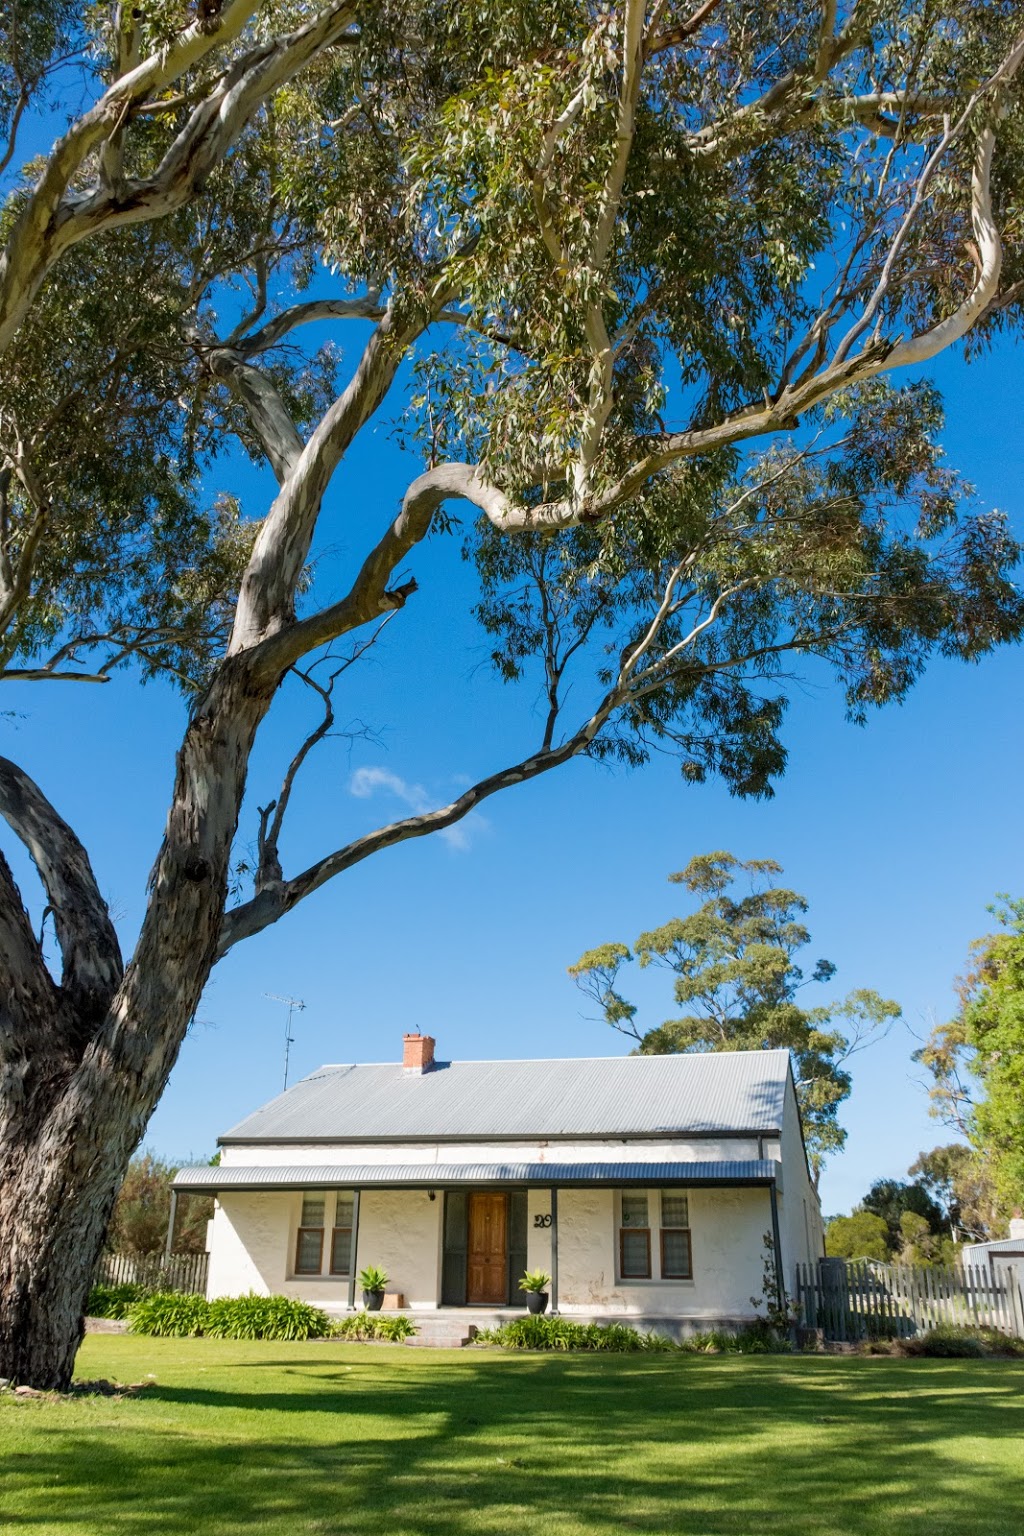 20 Hill Avenue Bed & Breakfast | lodging | 20 Hill Ave, Keith SA 5267, Australia | 0427551181 OR +61 427 551 181